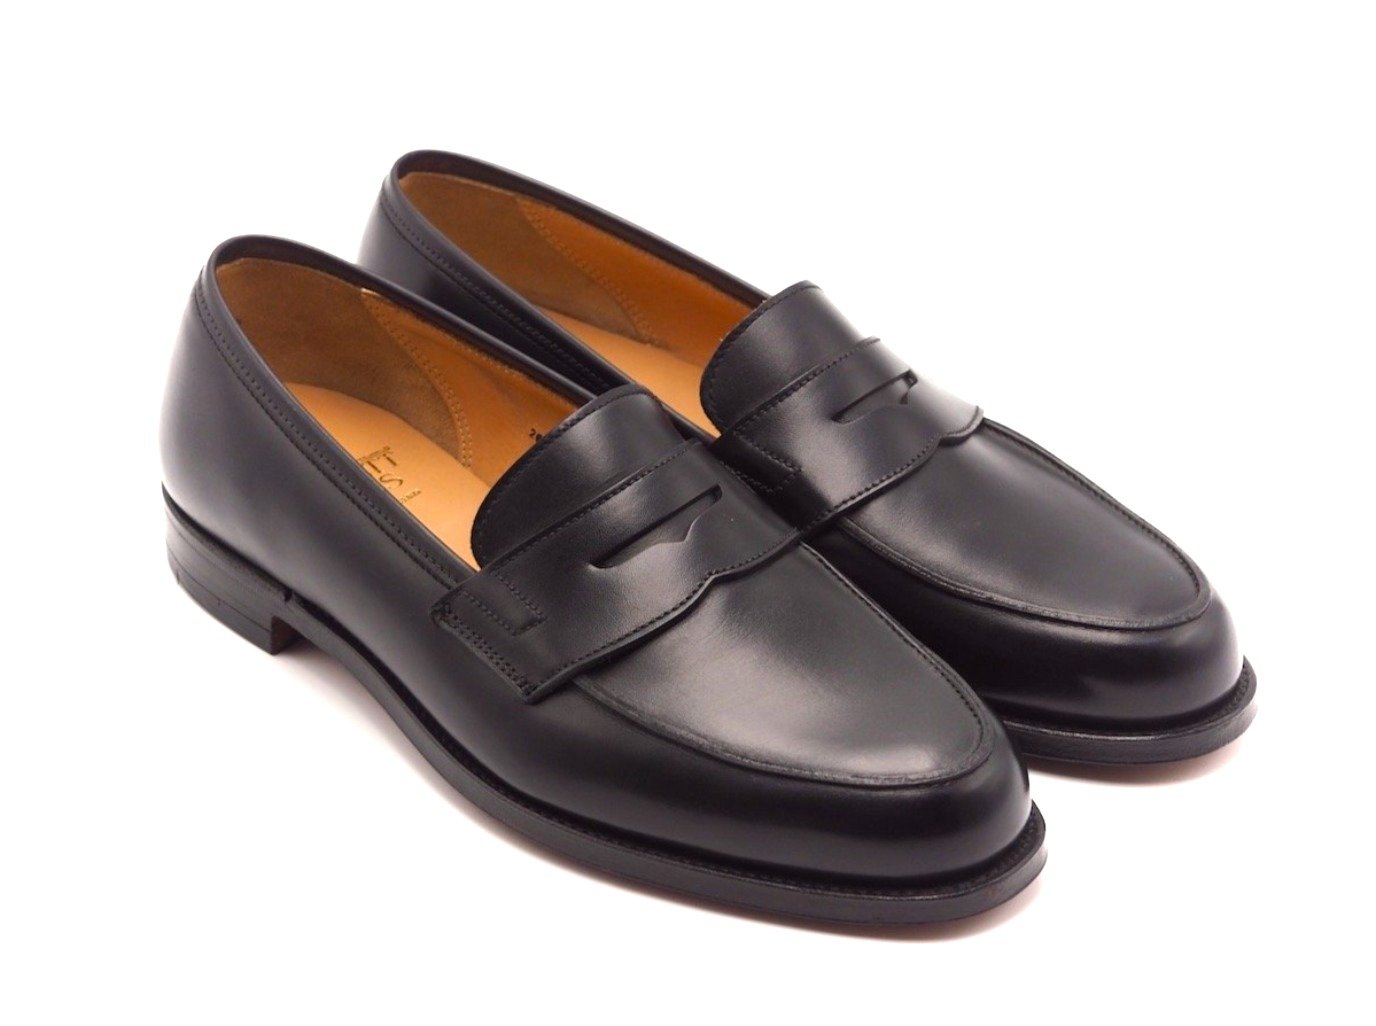 Front angle view of Crockett & Jones Grantham 2 penny loafers in black calf